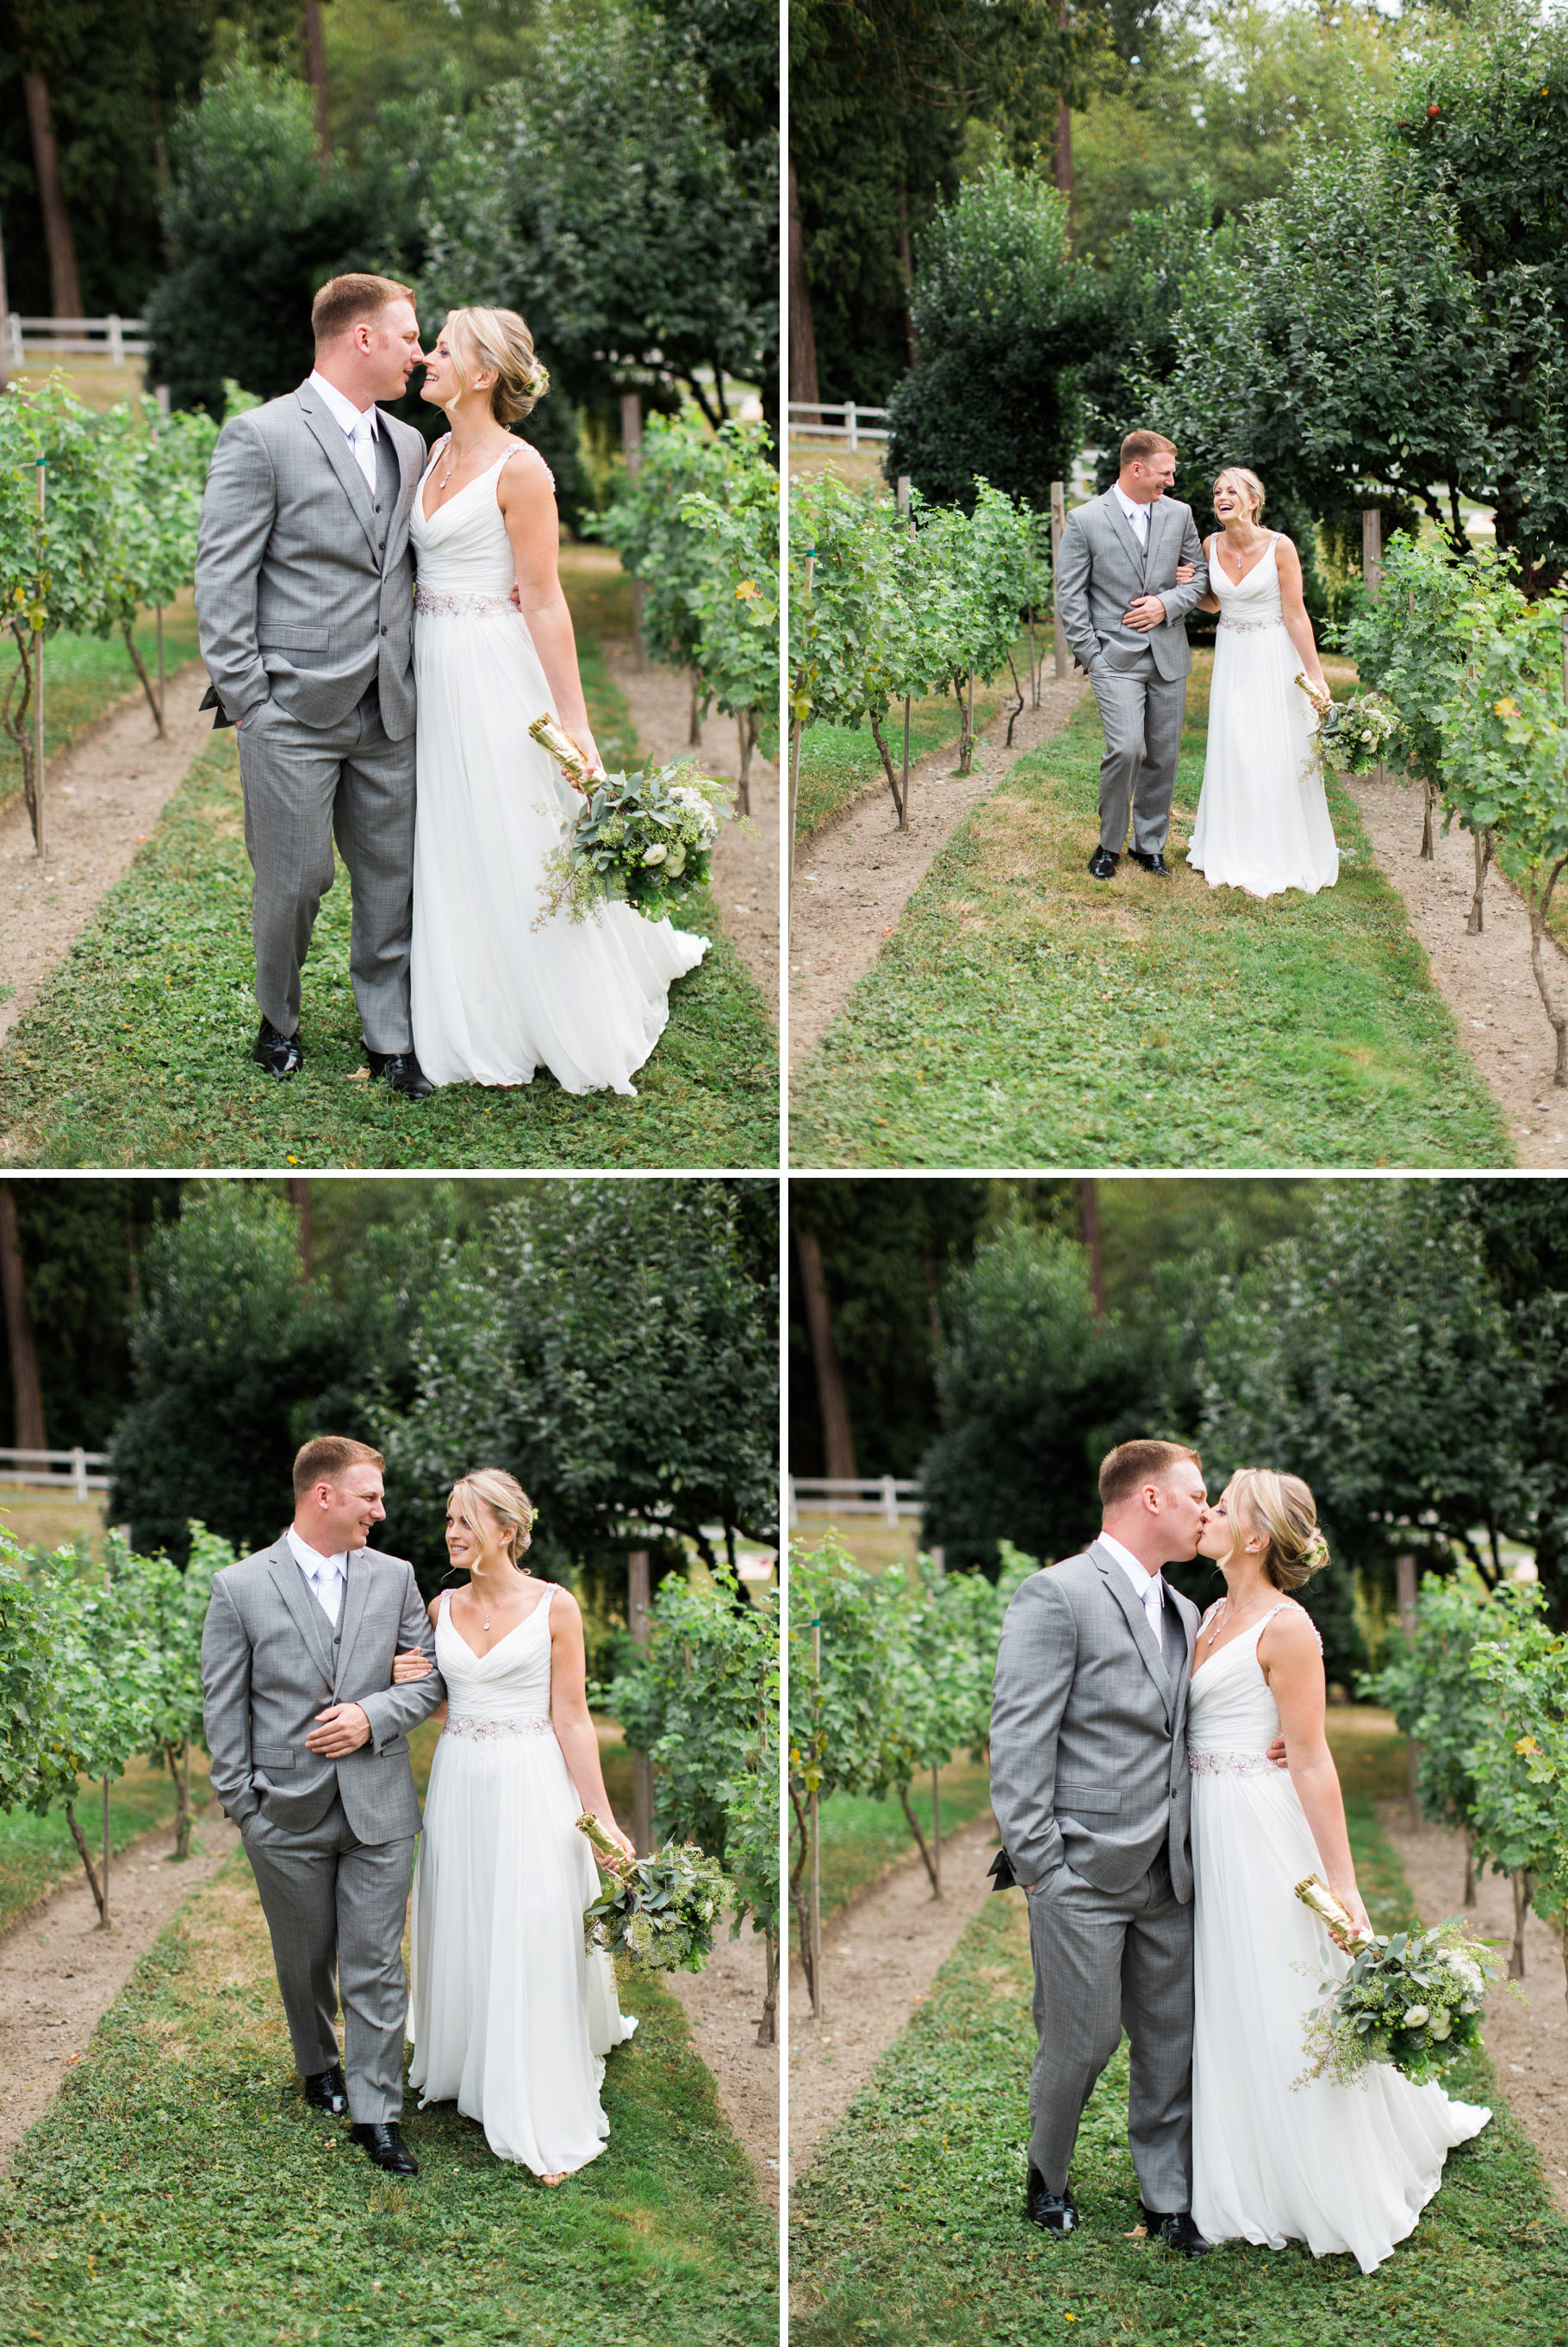 16-Delille-Cellars-Chateau-Vineyard-Bride-Groom-Wedding-Photography-by-Betty-Elaine-Woodinville-Winery-Seattle-Photographer